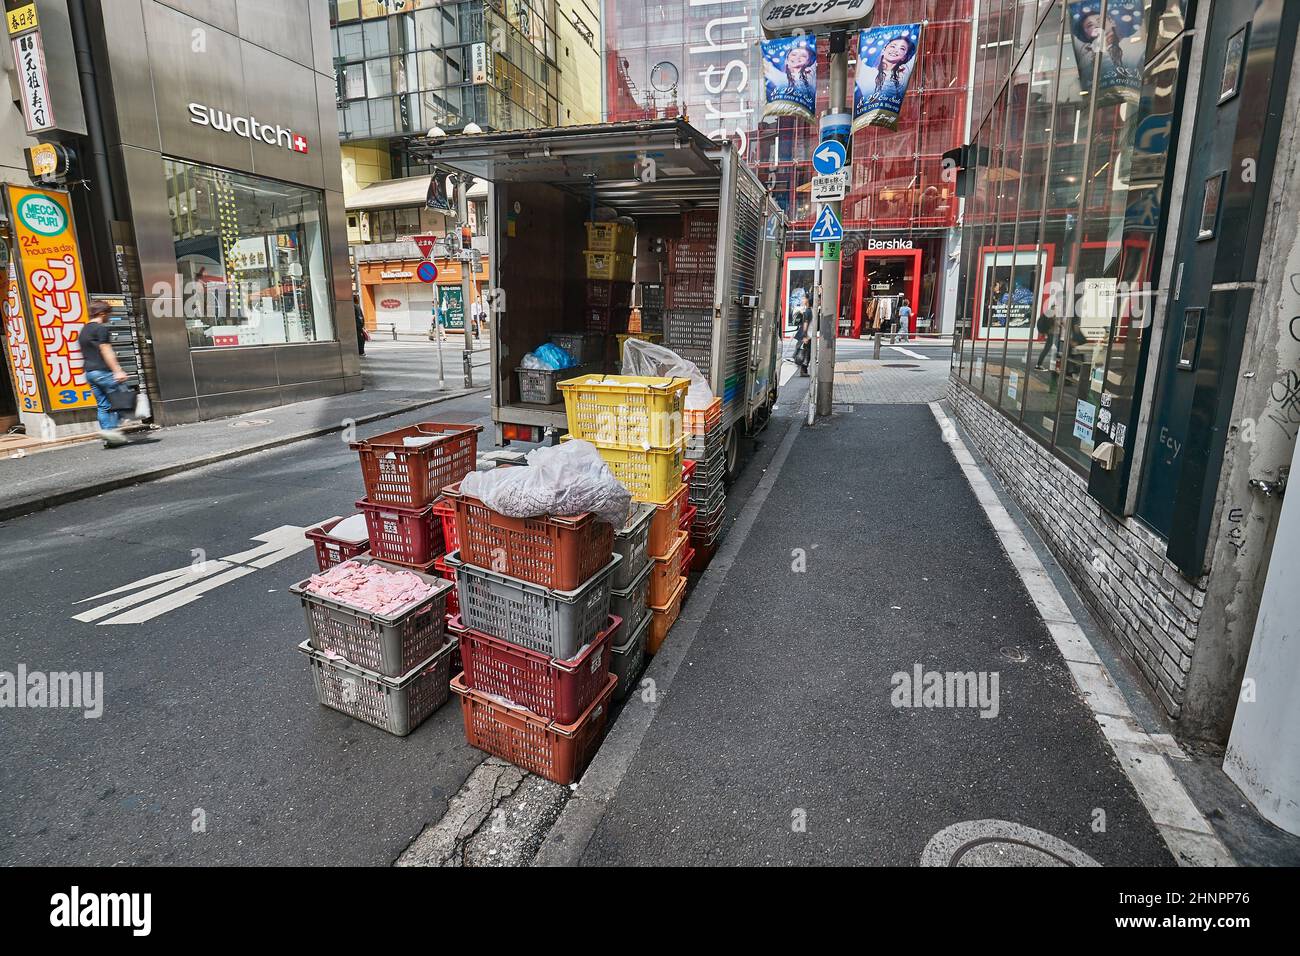 Truck delivering goods to shops in Japan Stock Photo